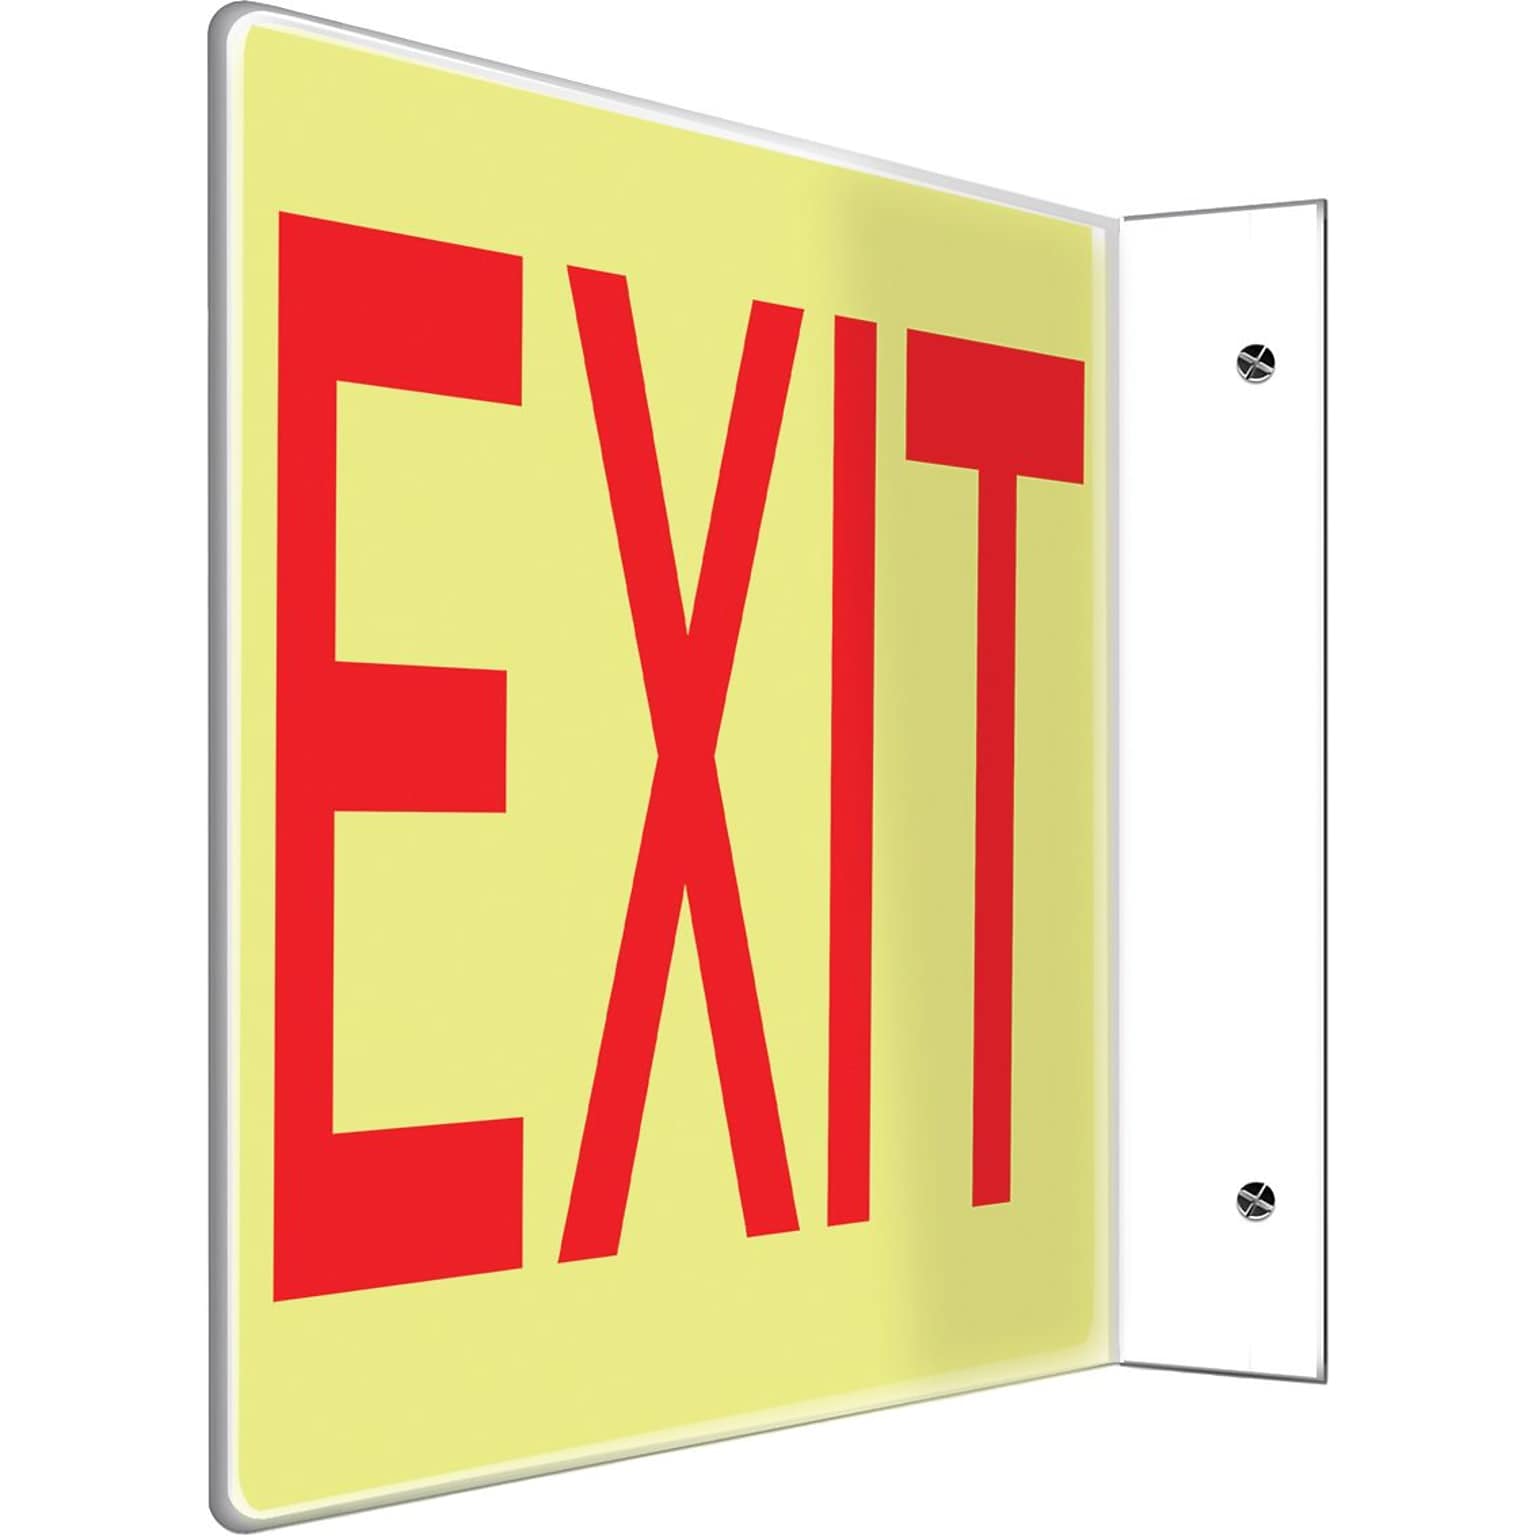 Accuform Exit Projection Sign, Red/White, 8H x 12W (PSP224)